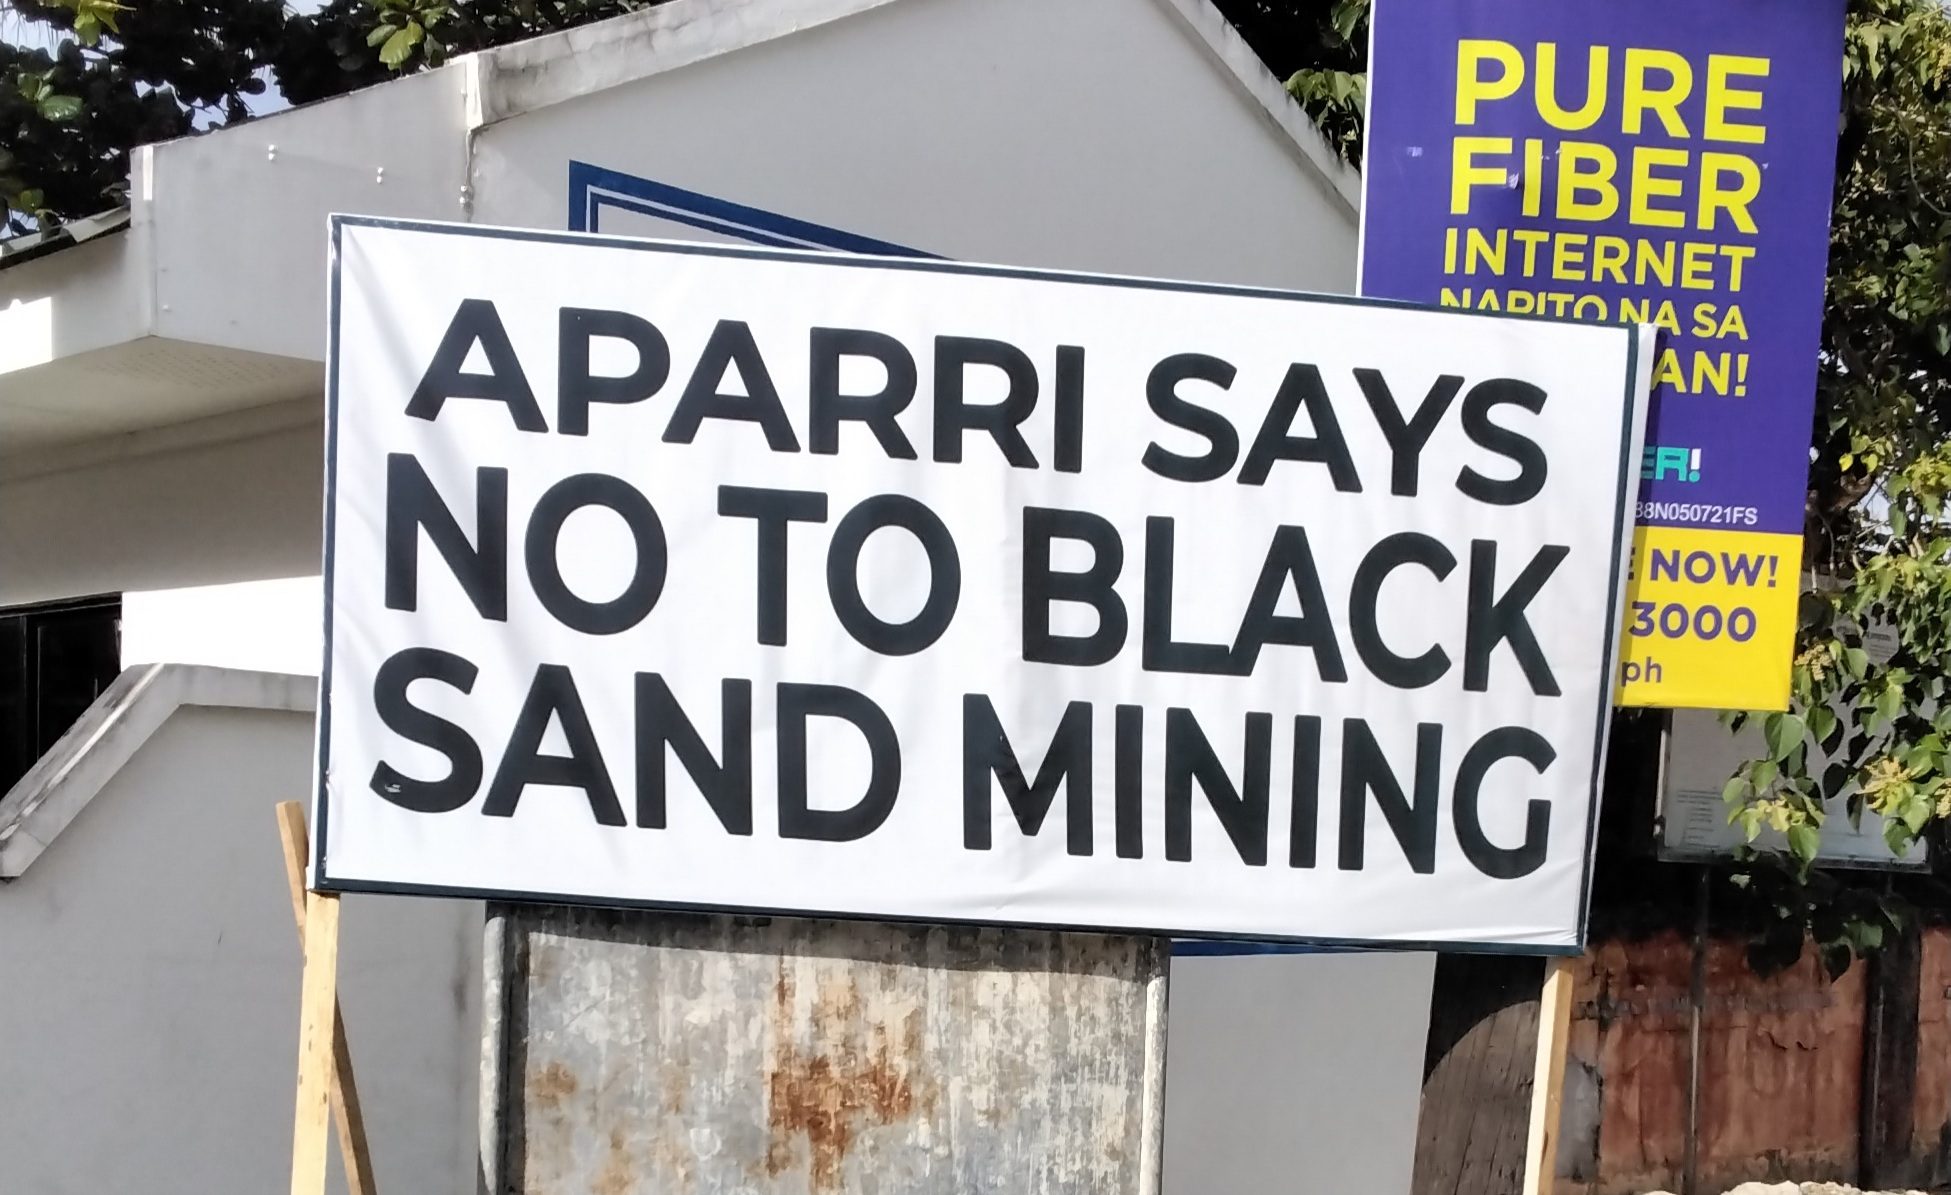 Cagayan dredging a cover for black sand mining – mayor, environmentalists